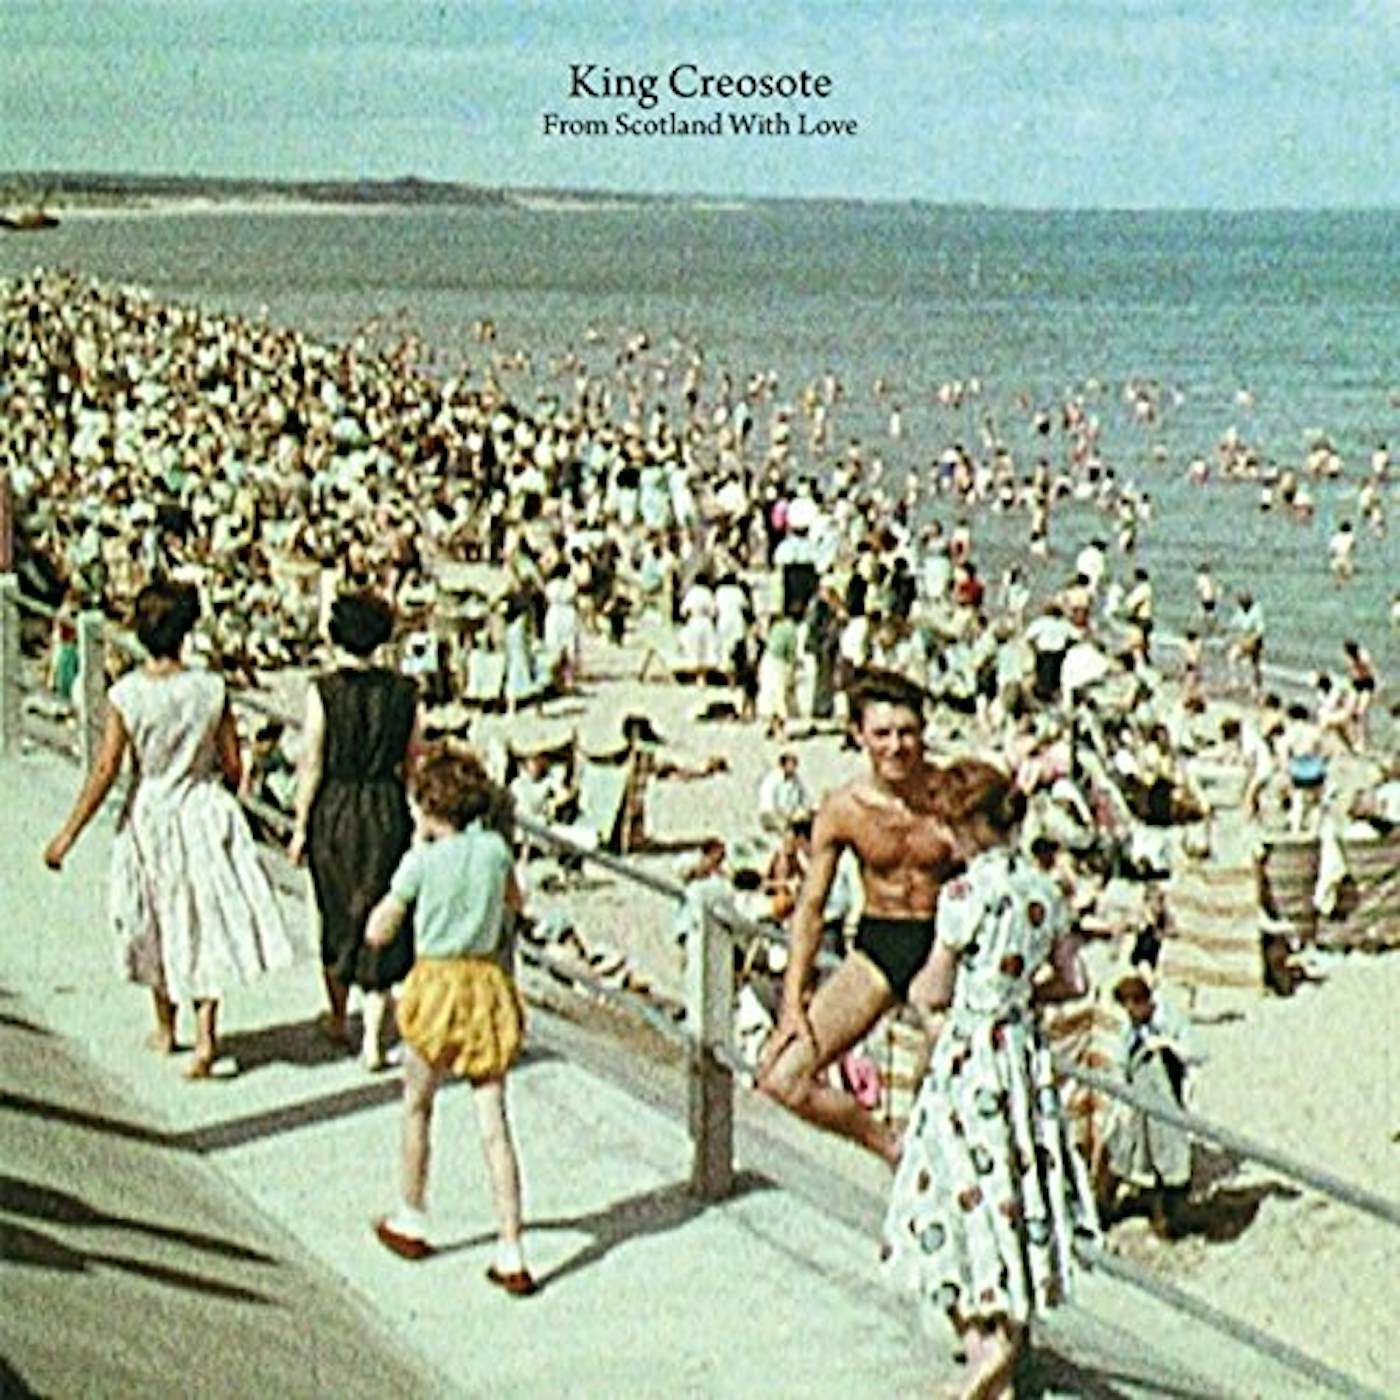 King Creosote FROM SCOTLAND WITH LOVE Vinyl Record